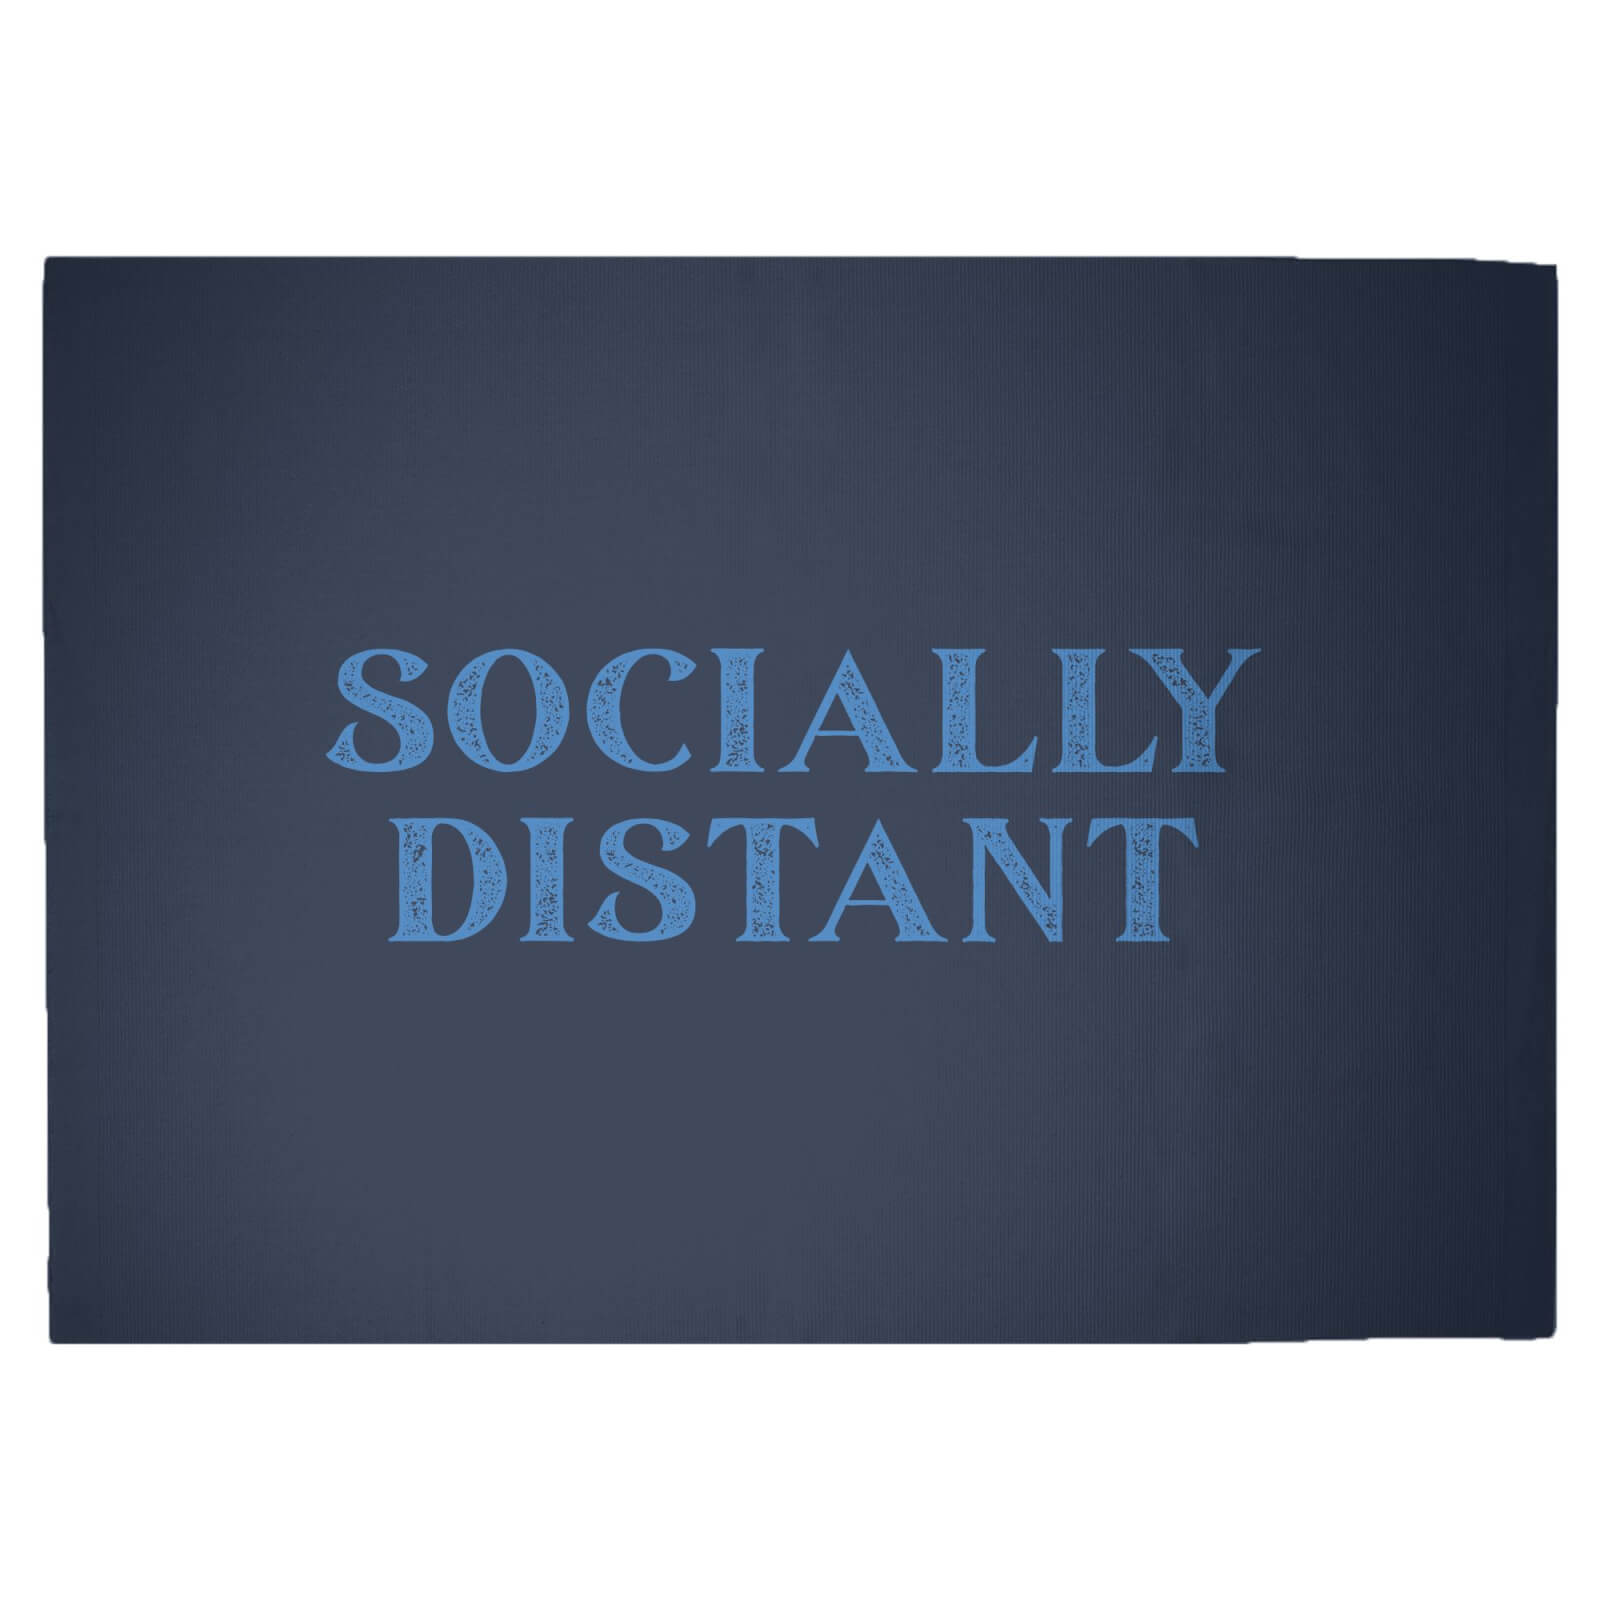 Socially Distant Woven Rug - Large